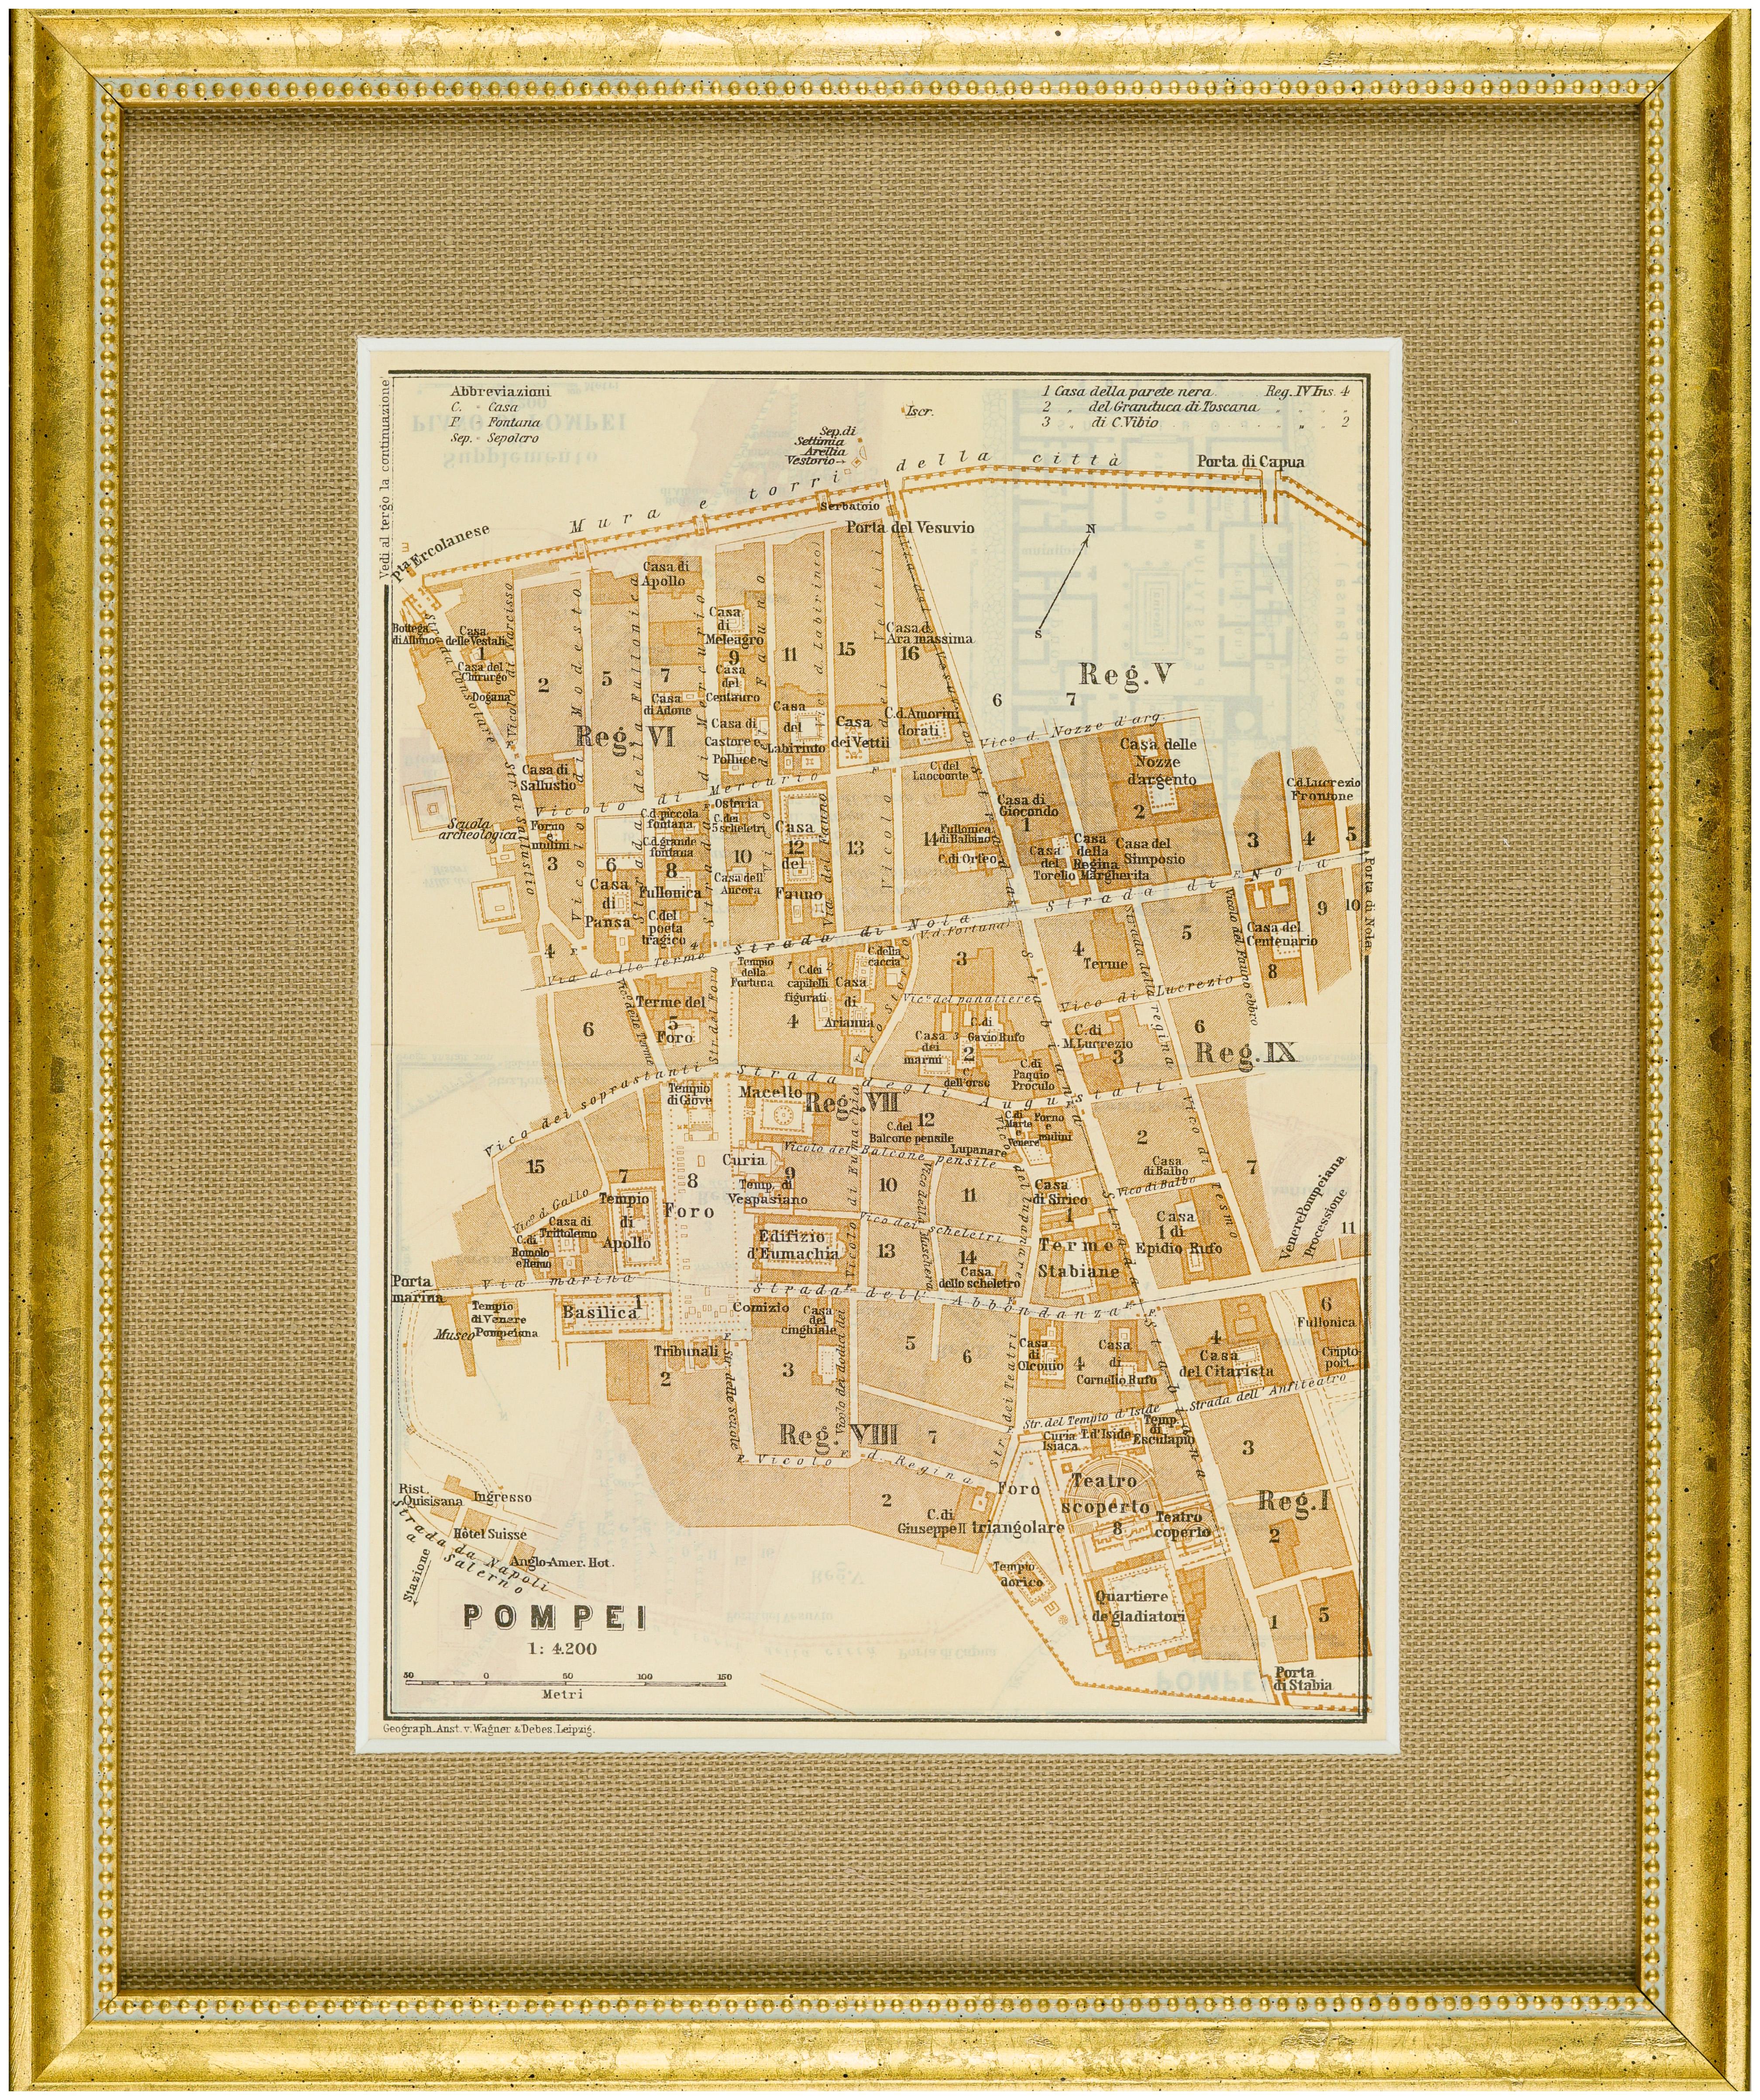 Unknown Landscape Print - 1928 Map of Pompeii, Italy